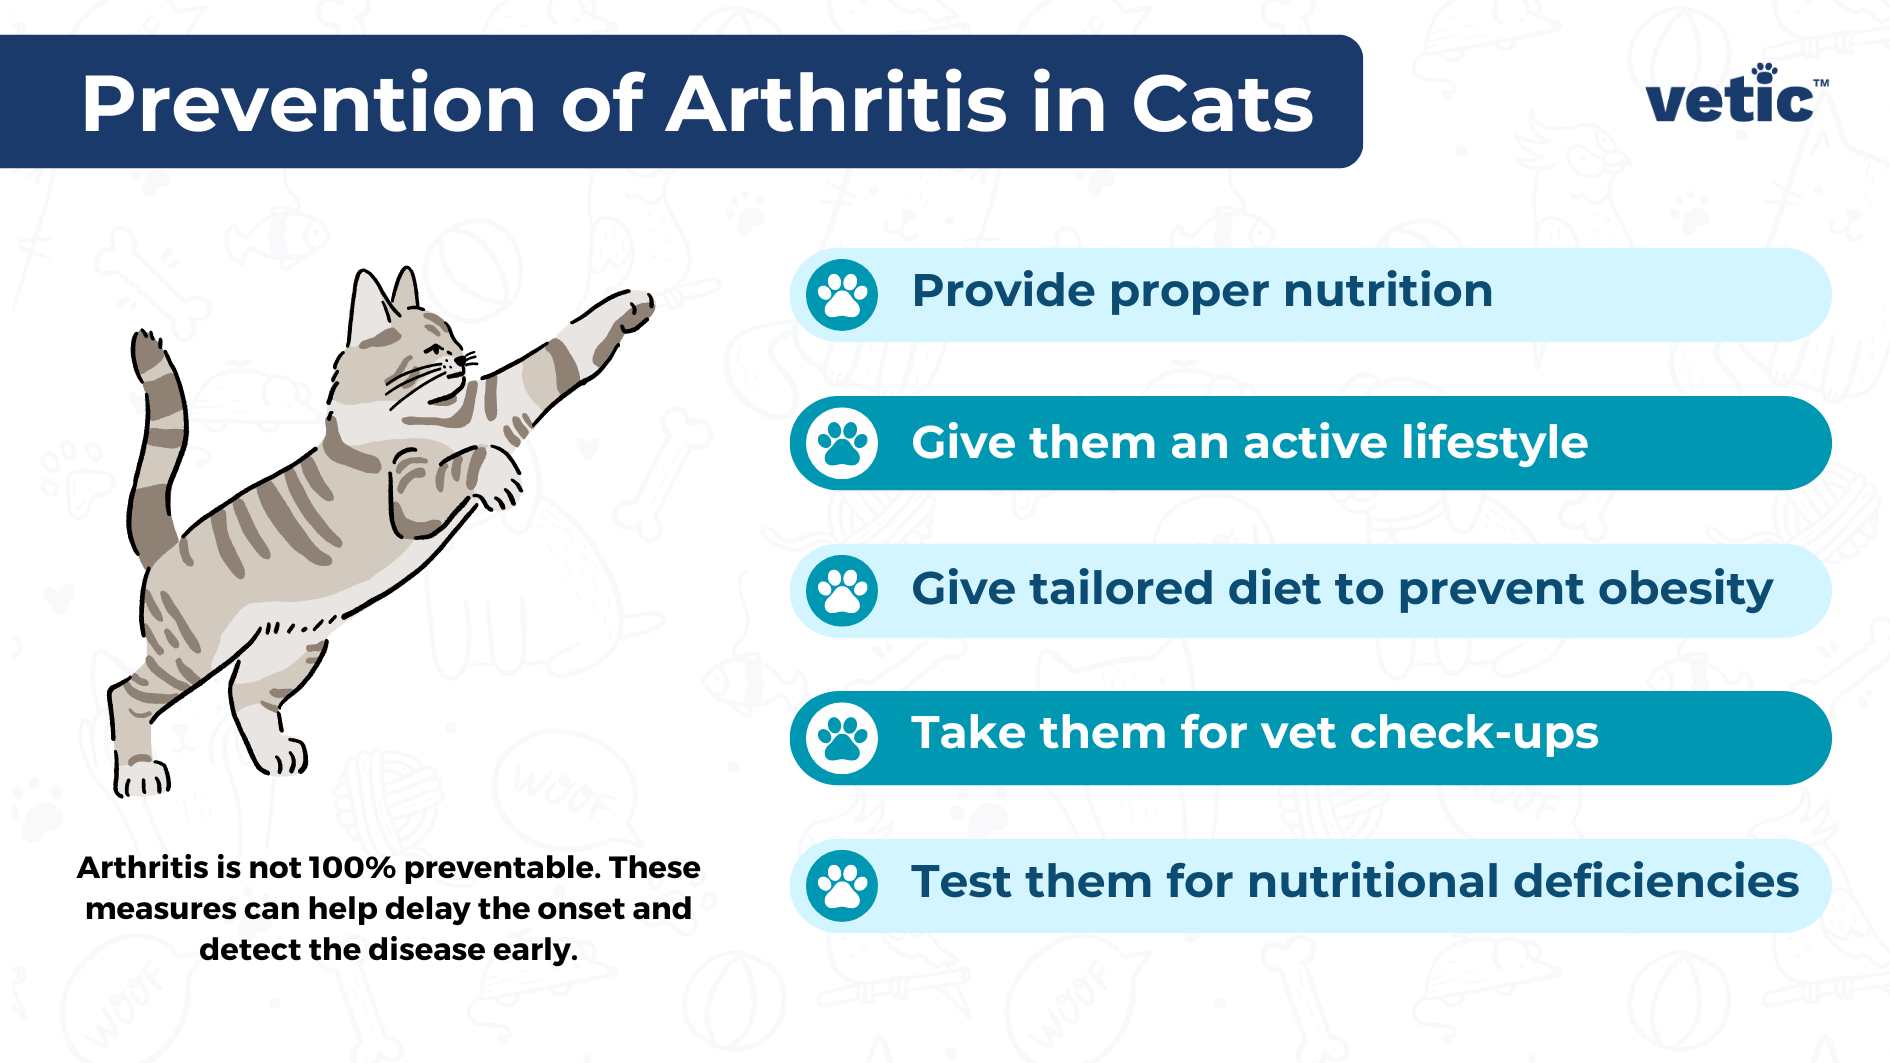 The infographic, titled “Prevention of Arthritis in Cats” by vetic, showcases a drawing of a striped cat on the left side, reaching out as if playing or stretching. The background is white with a blue header that includes the title. On the right side, there are five tips for preventing arthritis in cats, each with its own icon: Provide proper nutrition (paw print icon) Give them an active lifestyle (running cat icon) Give tailored diet to prevent obesity (scale icon) Take them for vet check-ups (stethoscope icon) Test them for nutritional deficiencies (checklist icon) Below these tips, a note clarifies that while arthritis is not 100% preventable, these measures can help delay its onset and detect the disease early.